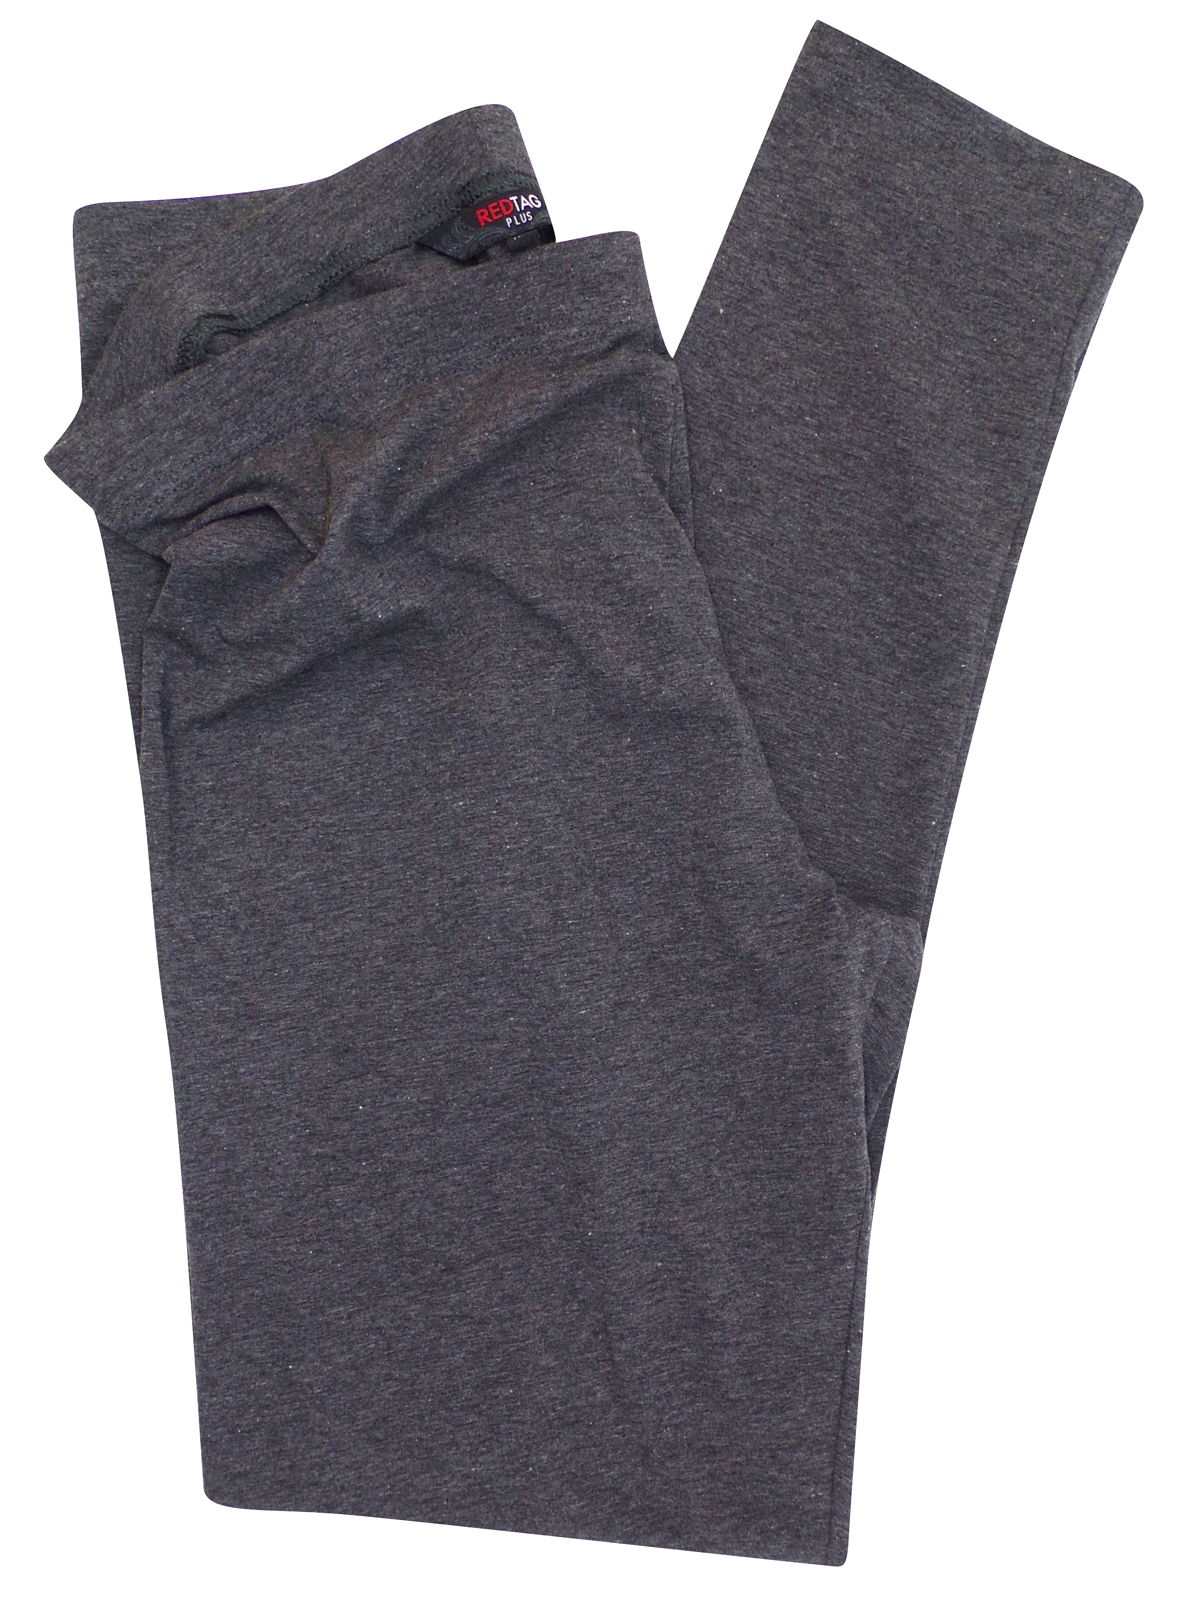 Red Tag - - RedTag CHARCOAL Melange Cotton Rich Opaque Full Length ...